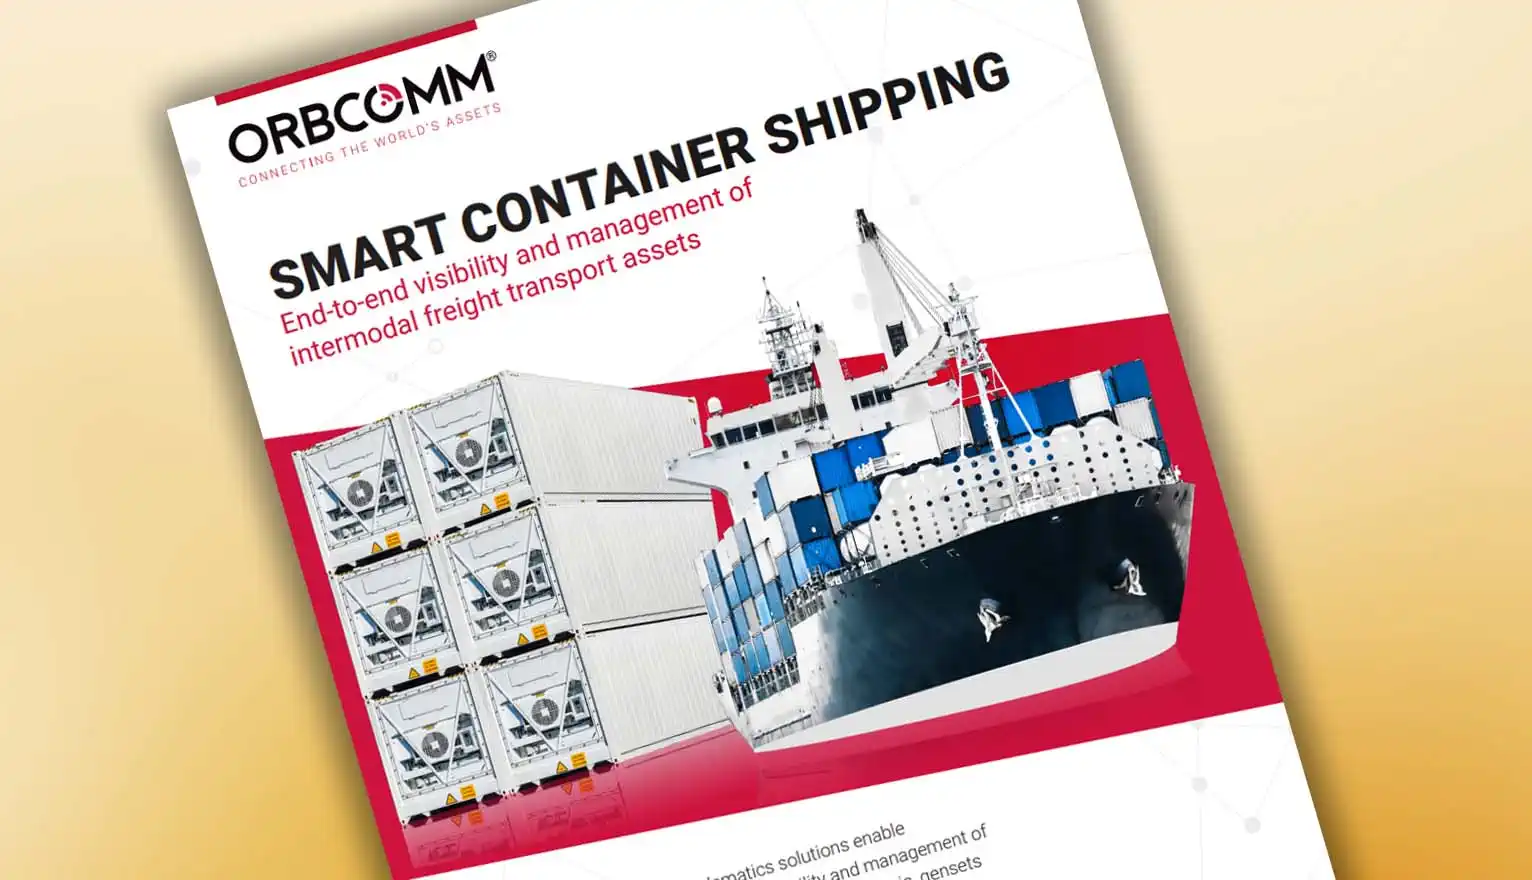 Smart Container Shipping